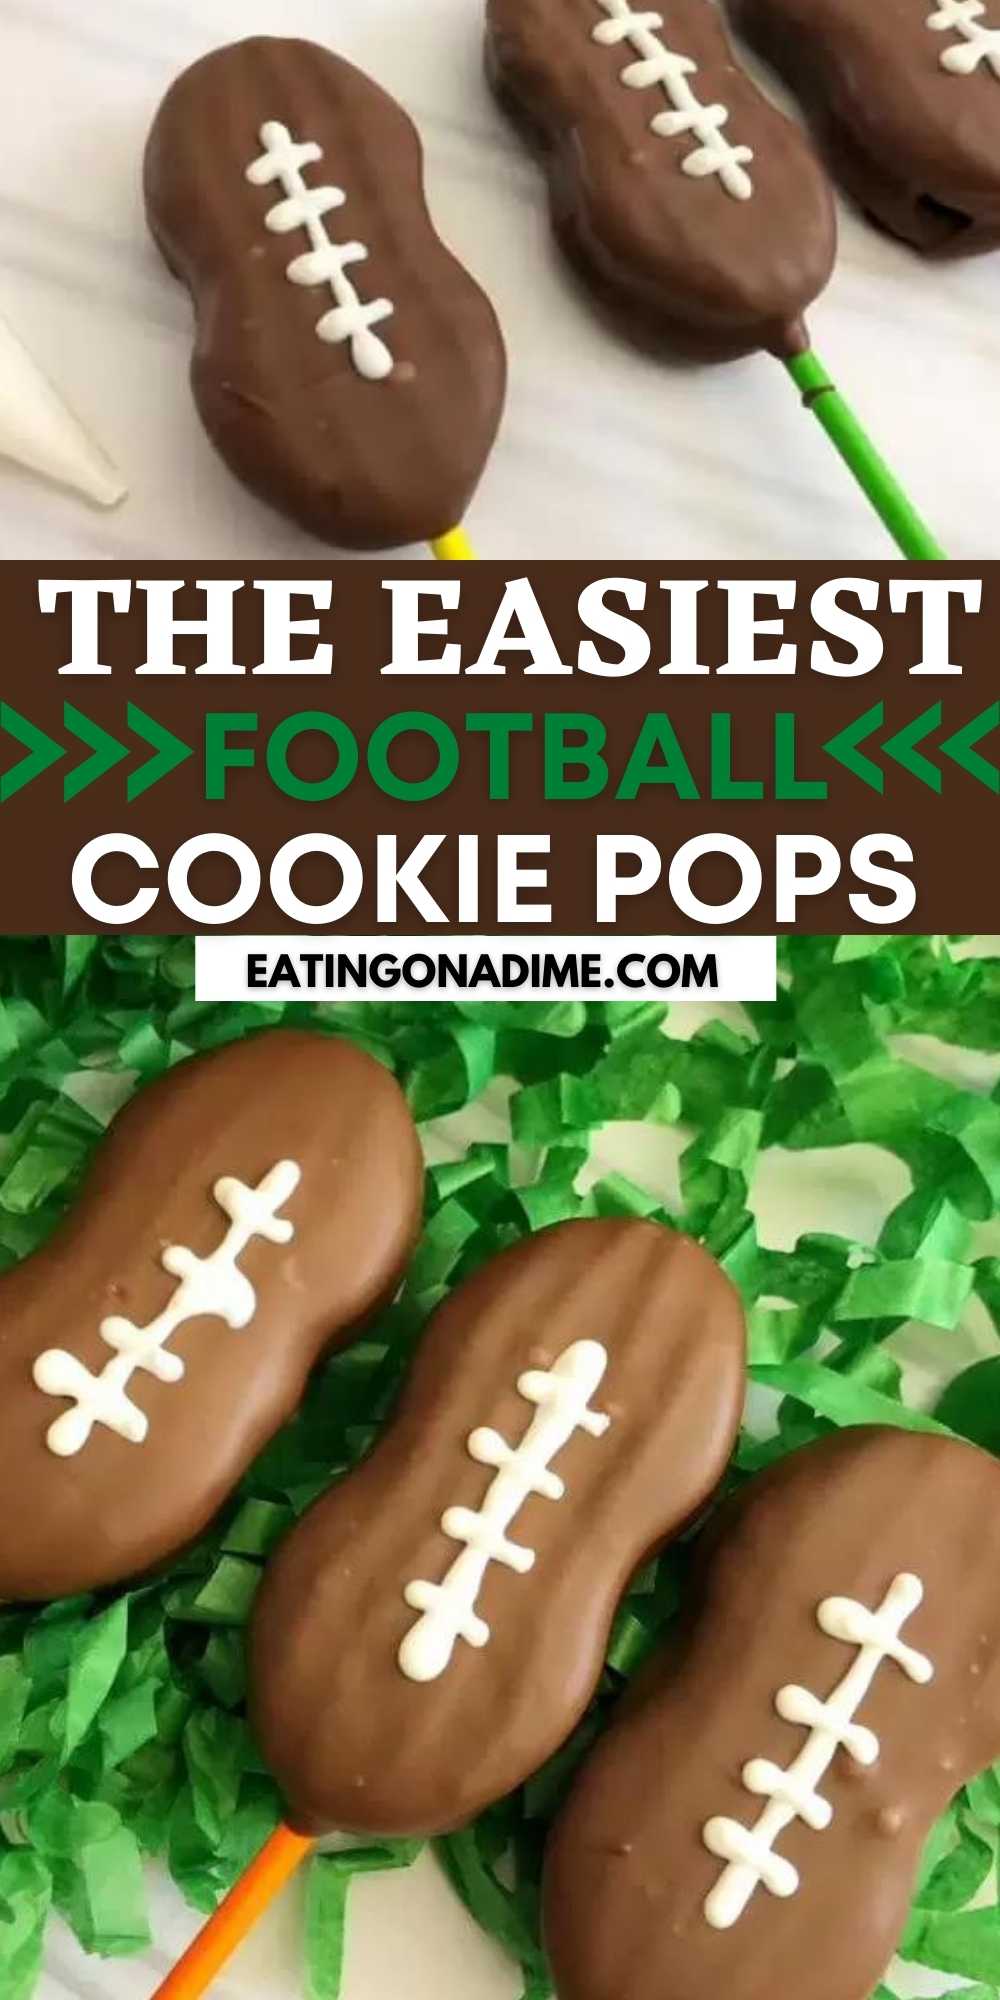 These football cookie pops will be great to serve for your next game day party. They are easy to make and they will be hit at your next party! These easy cookie pops decorated to look like footballs are adorable and easy to make with Nutter Butters.  #eatingonadime #cookierecipes #gamedayrecipes #footballrecipes 
